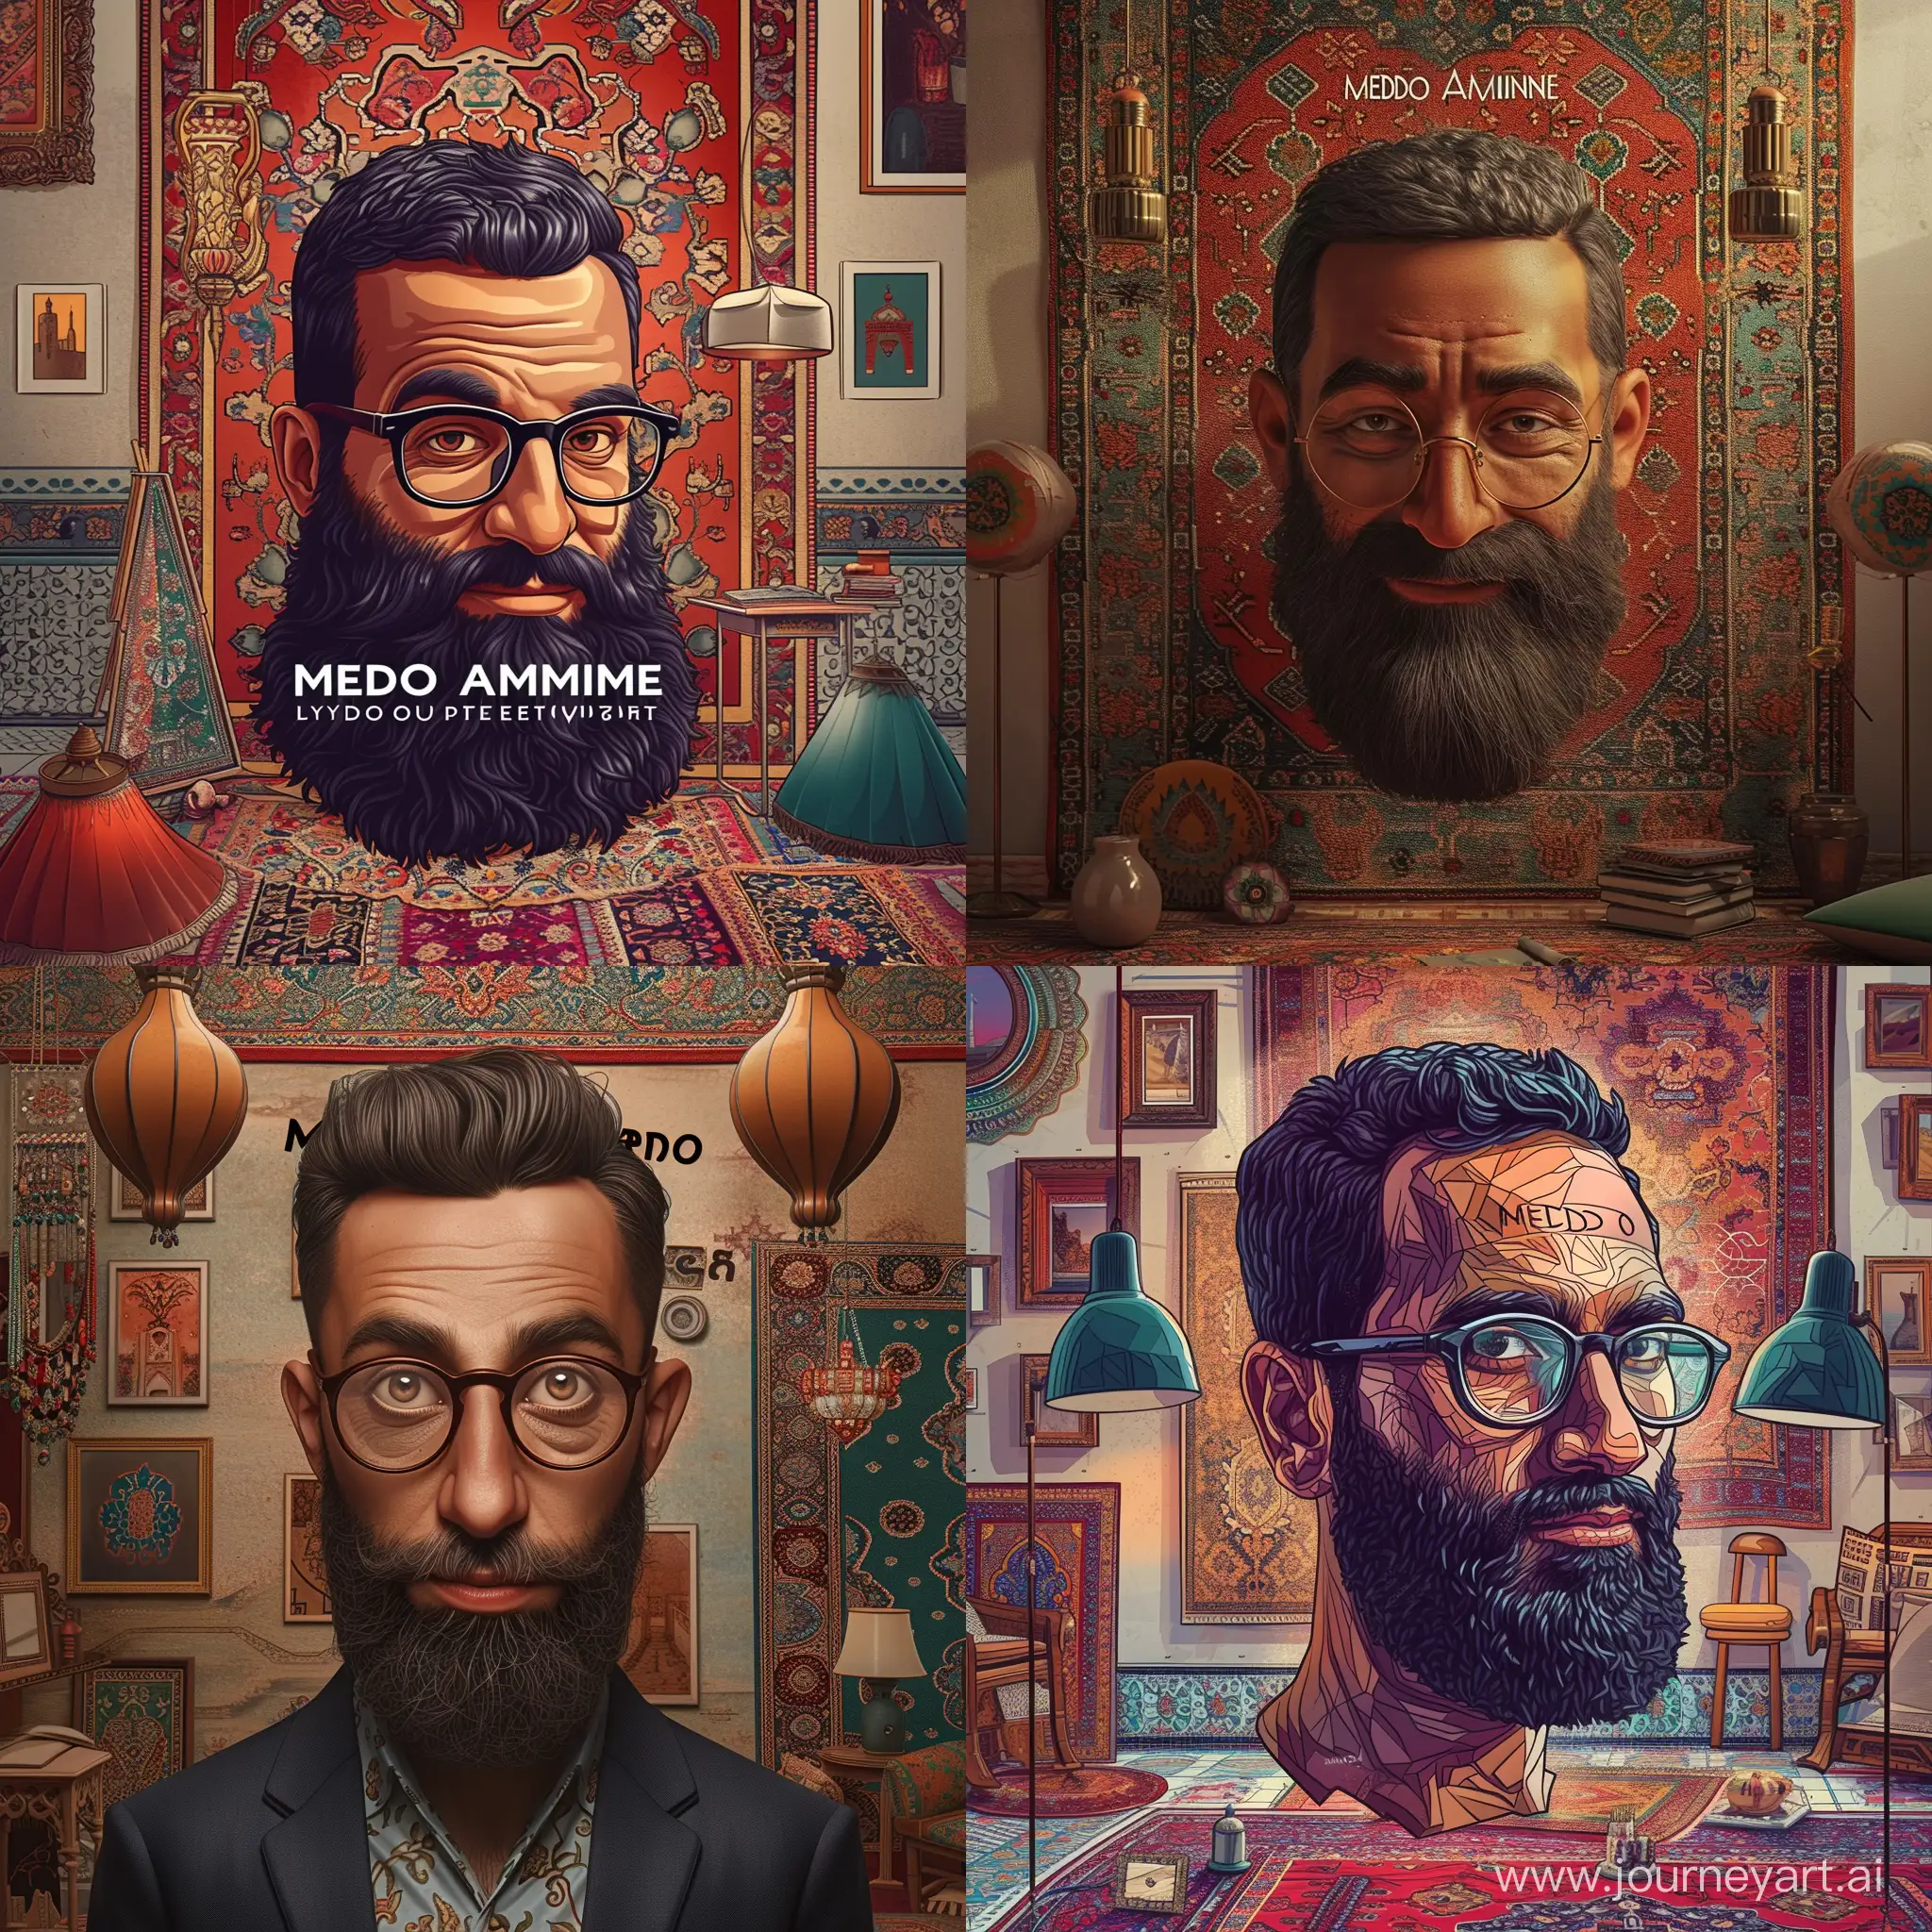 Logo: A realistic portrait of a Moroccan man with a well-groomed beard and glasses, exuding confidence and wisdom. The name "MEDO AMINE" is elegantly incorporated into the design.  Environment: A tastefully decorated room with Moroccan-inspired elements, such as vibrant rugs, ornate tiles, and traditional artwork.  Mood/Feelings: Sophisticated, cultured, and refined atmosphere, with a touch of intrigue and intellect.  Artistic Medium/Techniques: High-quality digital illustration with meticulous attention to detail, capturing the textures of the beard and glasses with precision.  Artists/Illustrators/Art Movements: Realistic portrait artists, hyperrealism, contemporary portraiture.  Camera Settings: High-resolution camera, studio lighting to capture the fine details and textures of the subject's face.